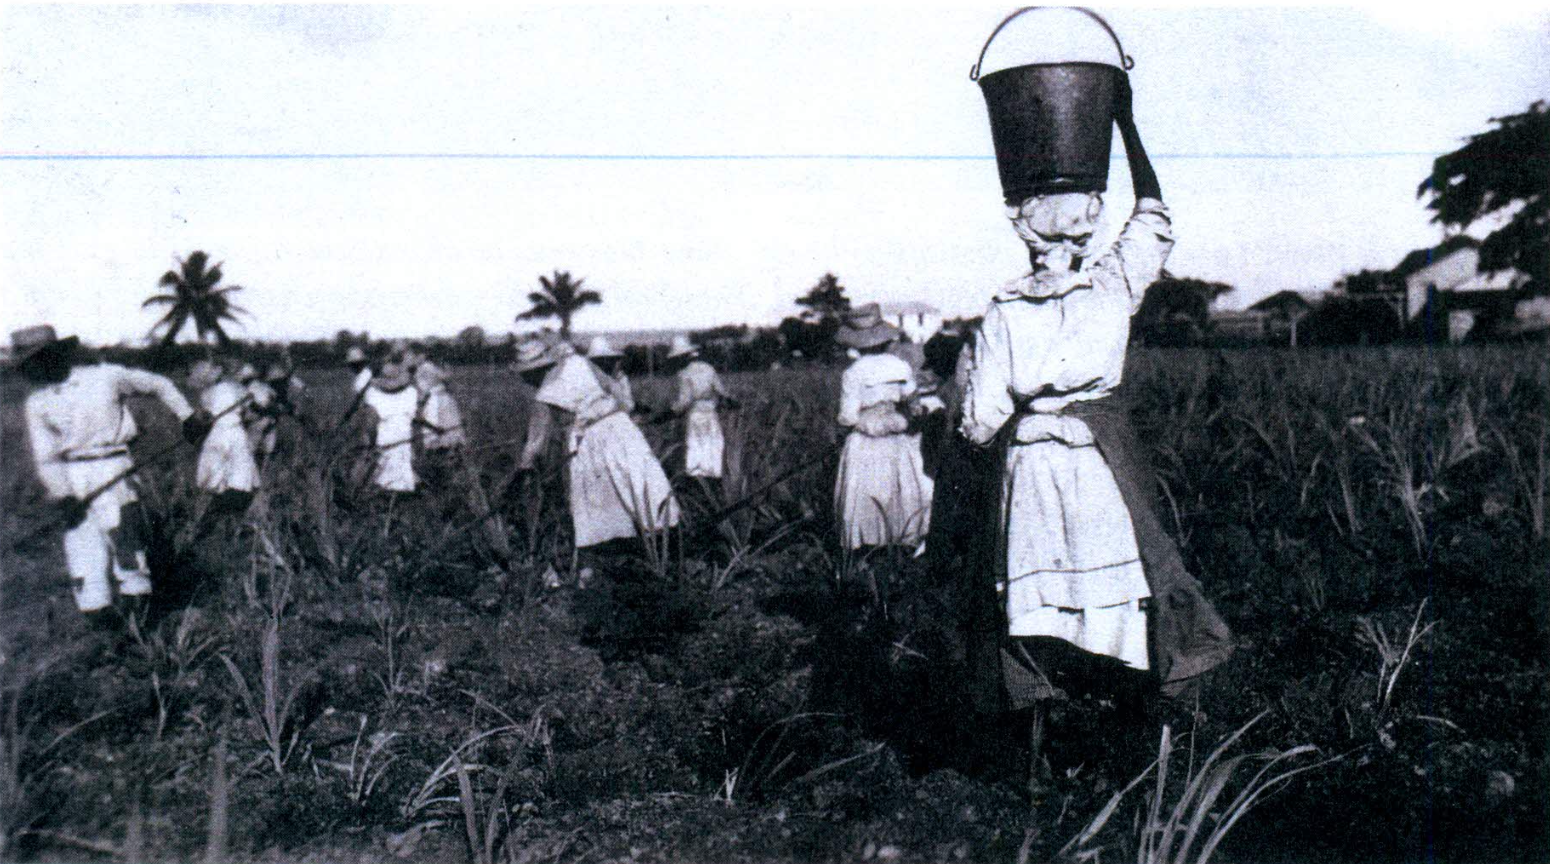 A gang of women weeding the young cane field. In 1818, Budhoe mother was listed as a field worker. (Photo courtesy Library of Congress)